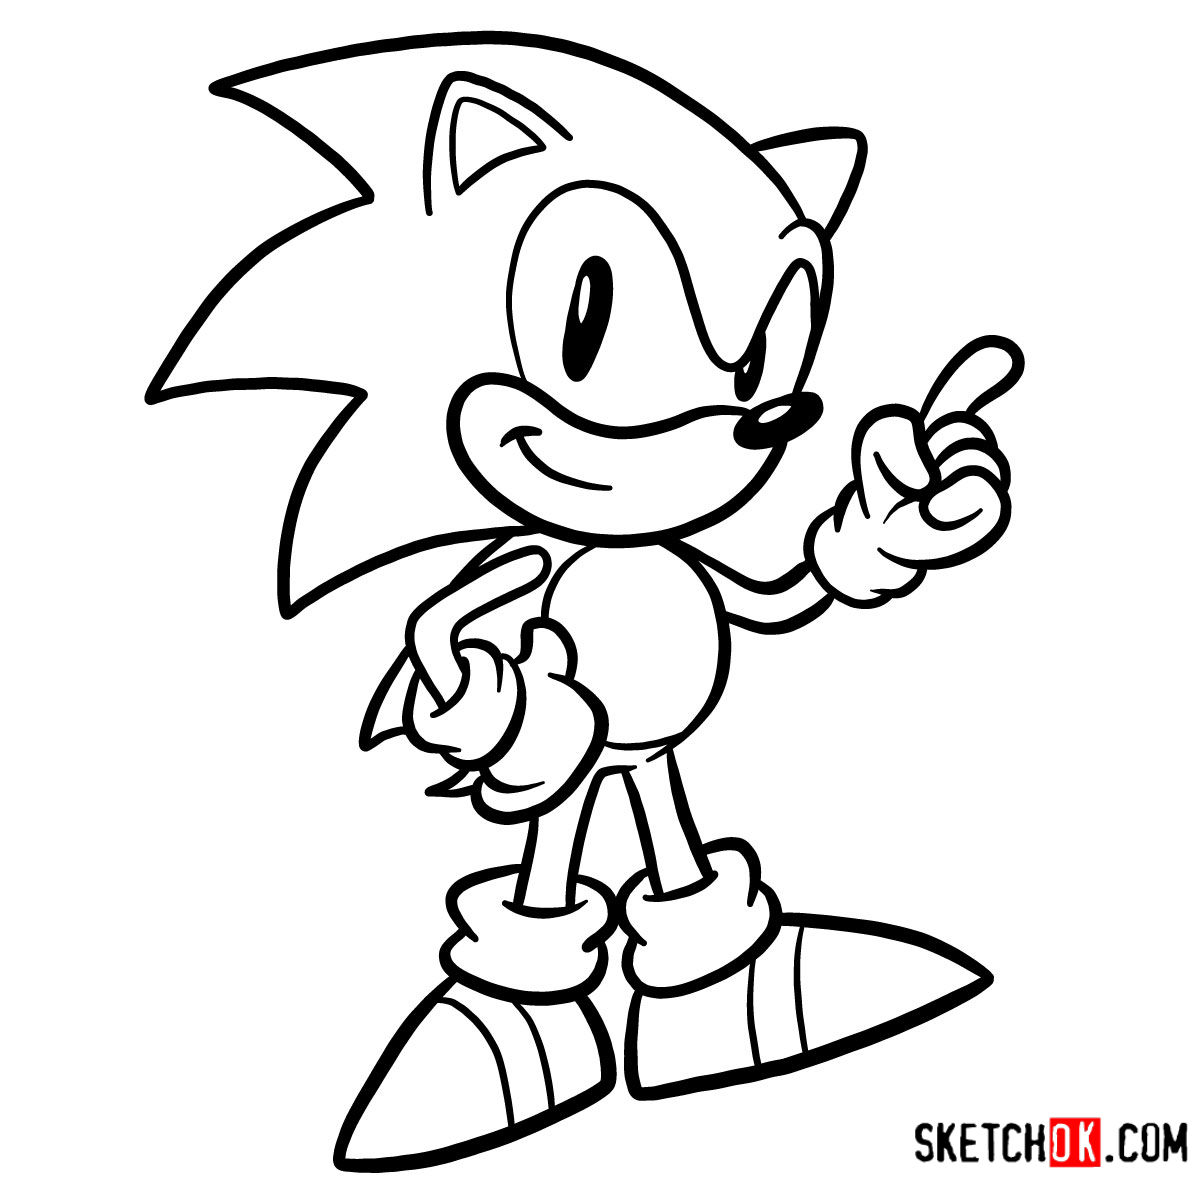 How to draw Sonic the Hedgehog SEGA games style - Sketchok easy drawing  guides